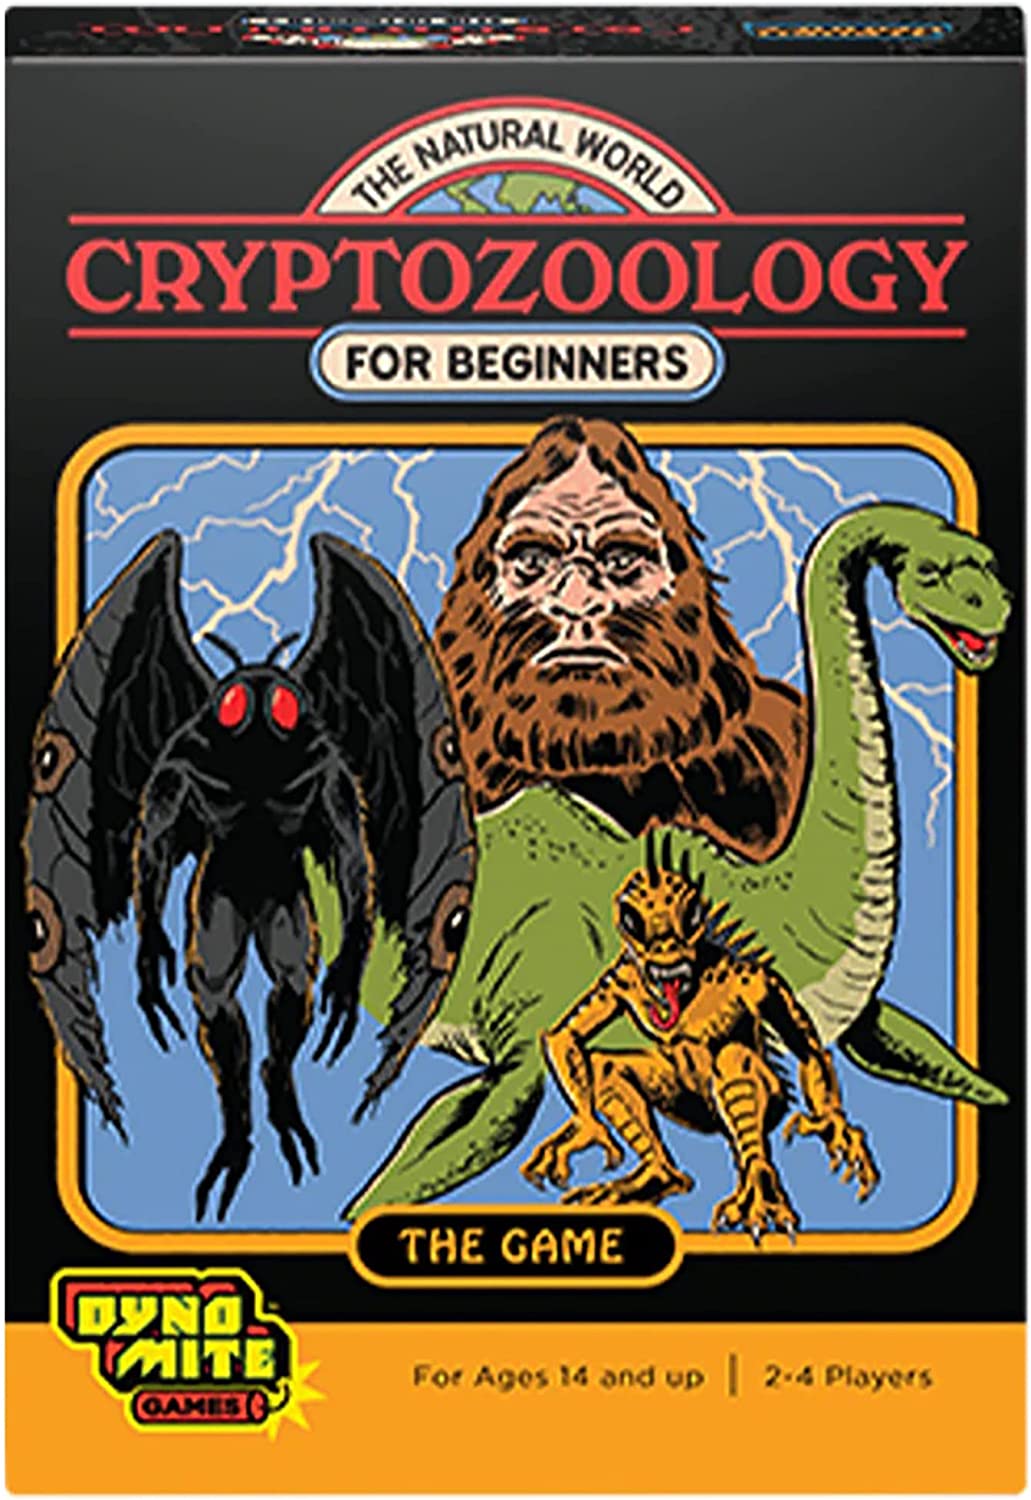 Steven Rhodes - Cryptozoology for Begginers